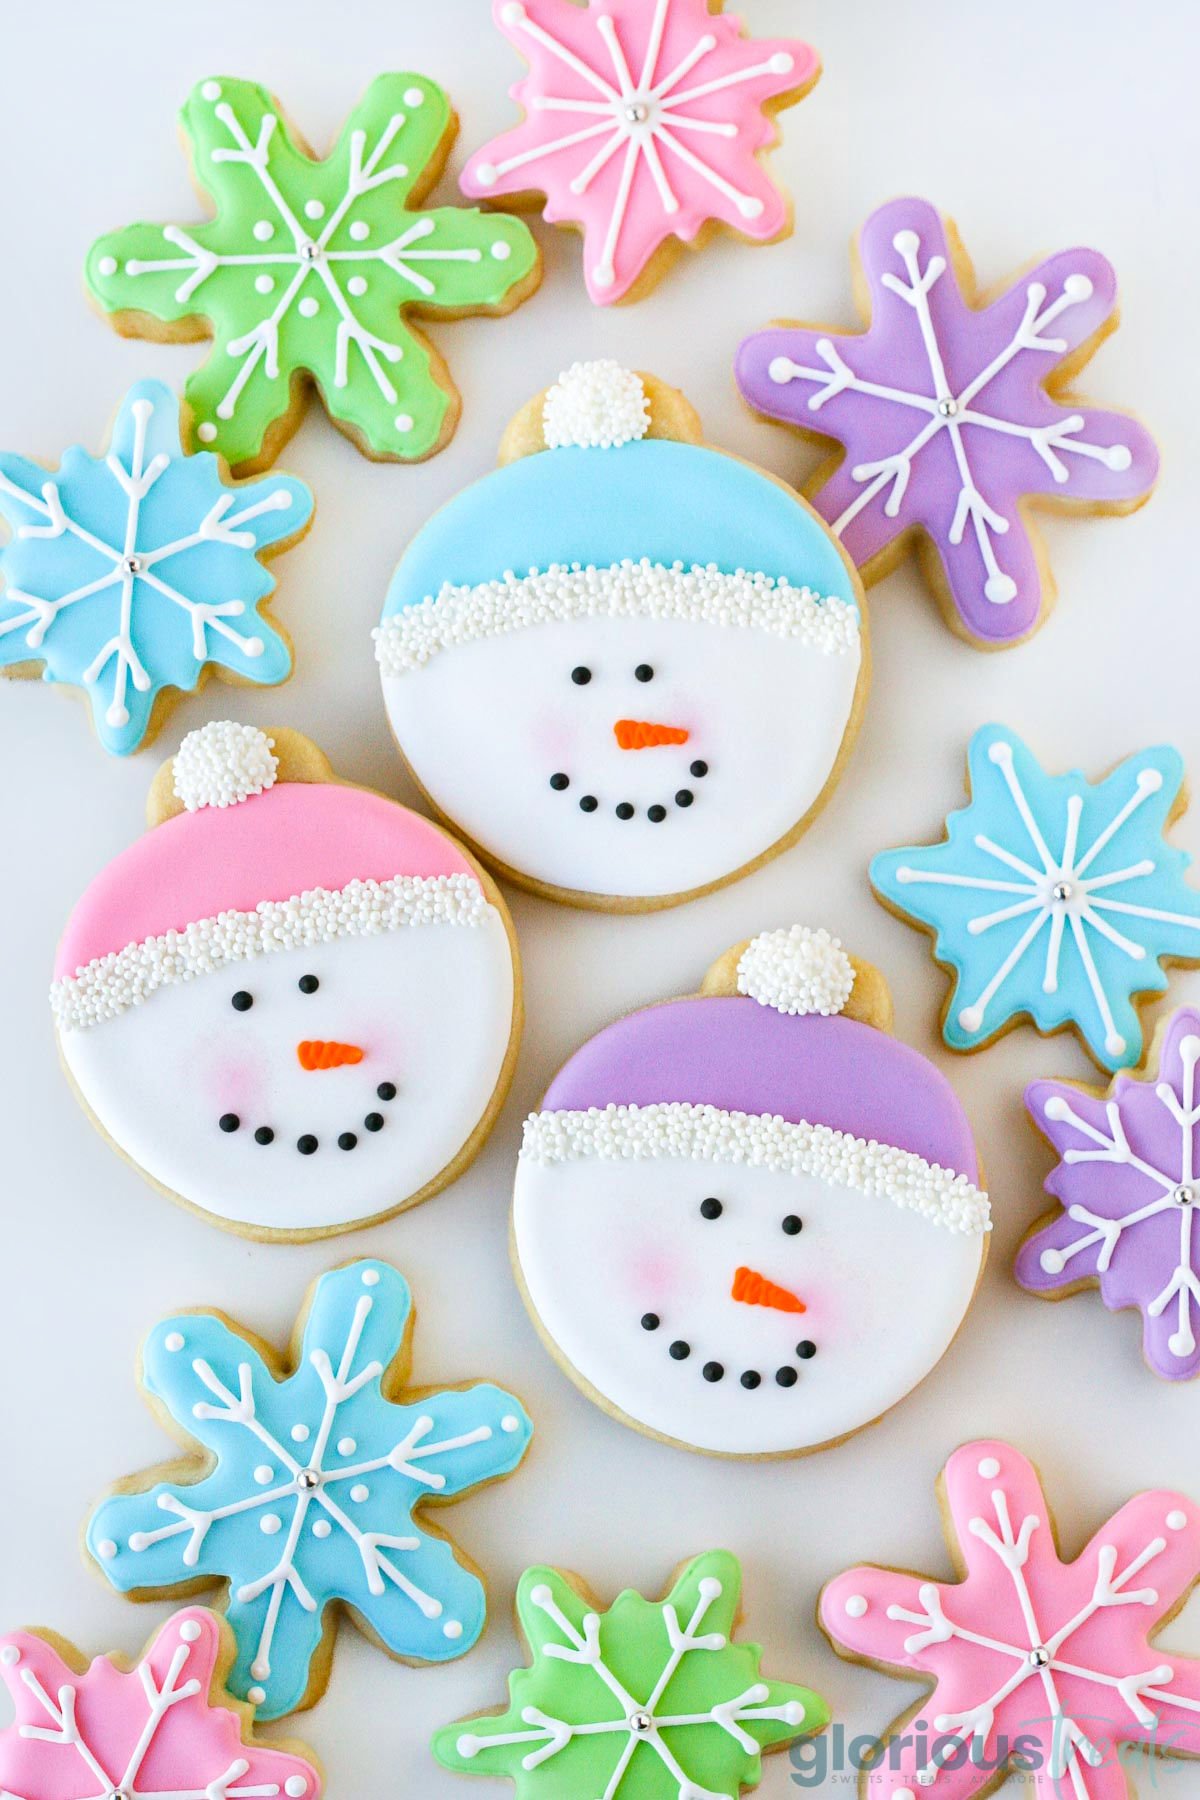 Sugar cookies cut out into snowman faces and decorated with royal icing. The snowman caps are pink, blue and purple. 